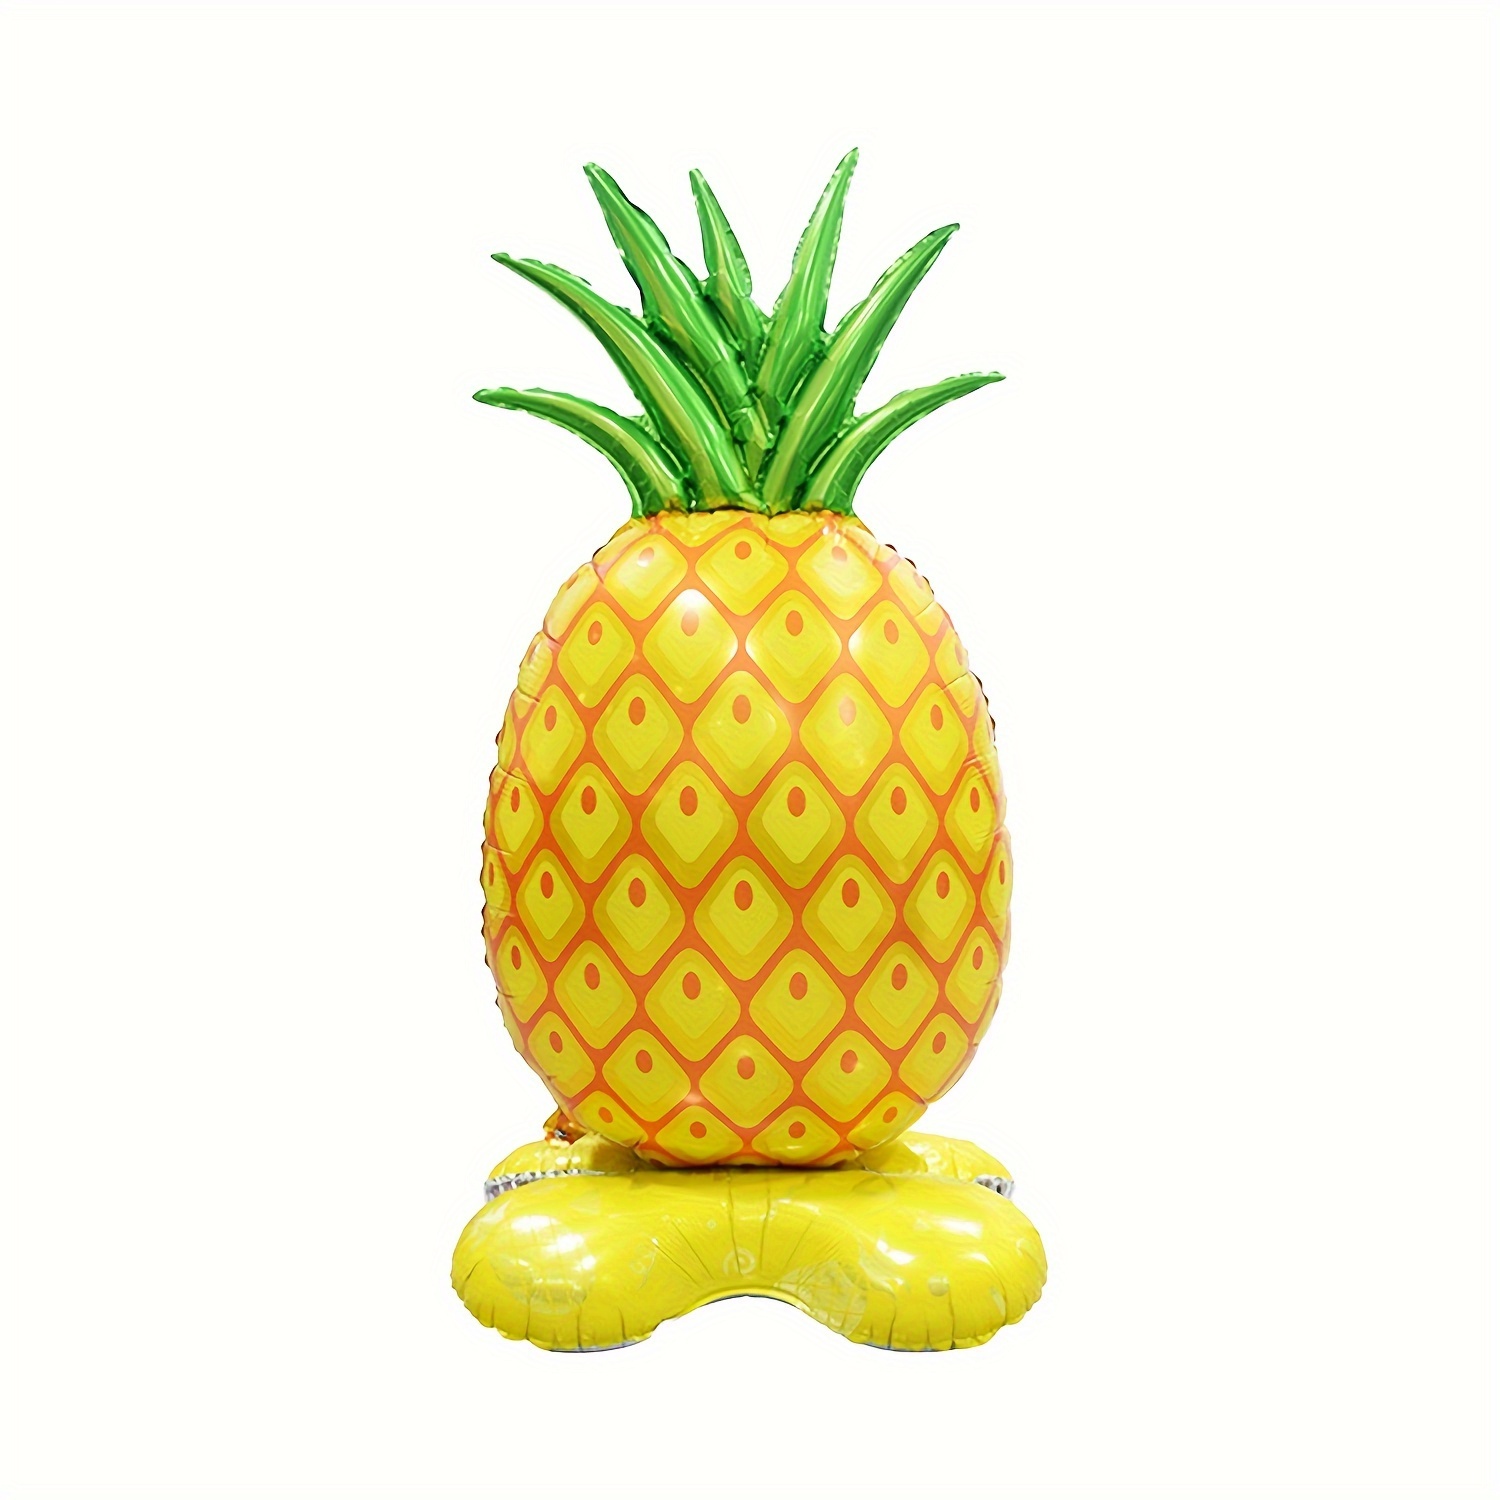 

1pc, Giant Pineapple Foil Balloon - Suitable For Summer Season, Beach Parties, Hawaii Weddings, Anniversaries, And More